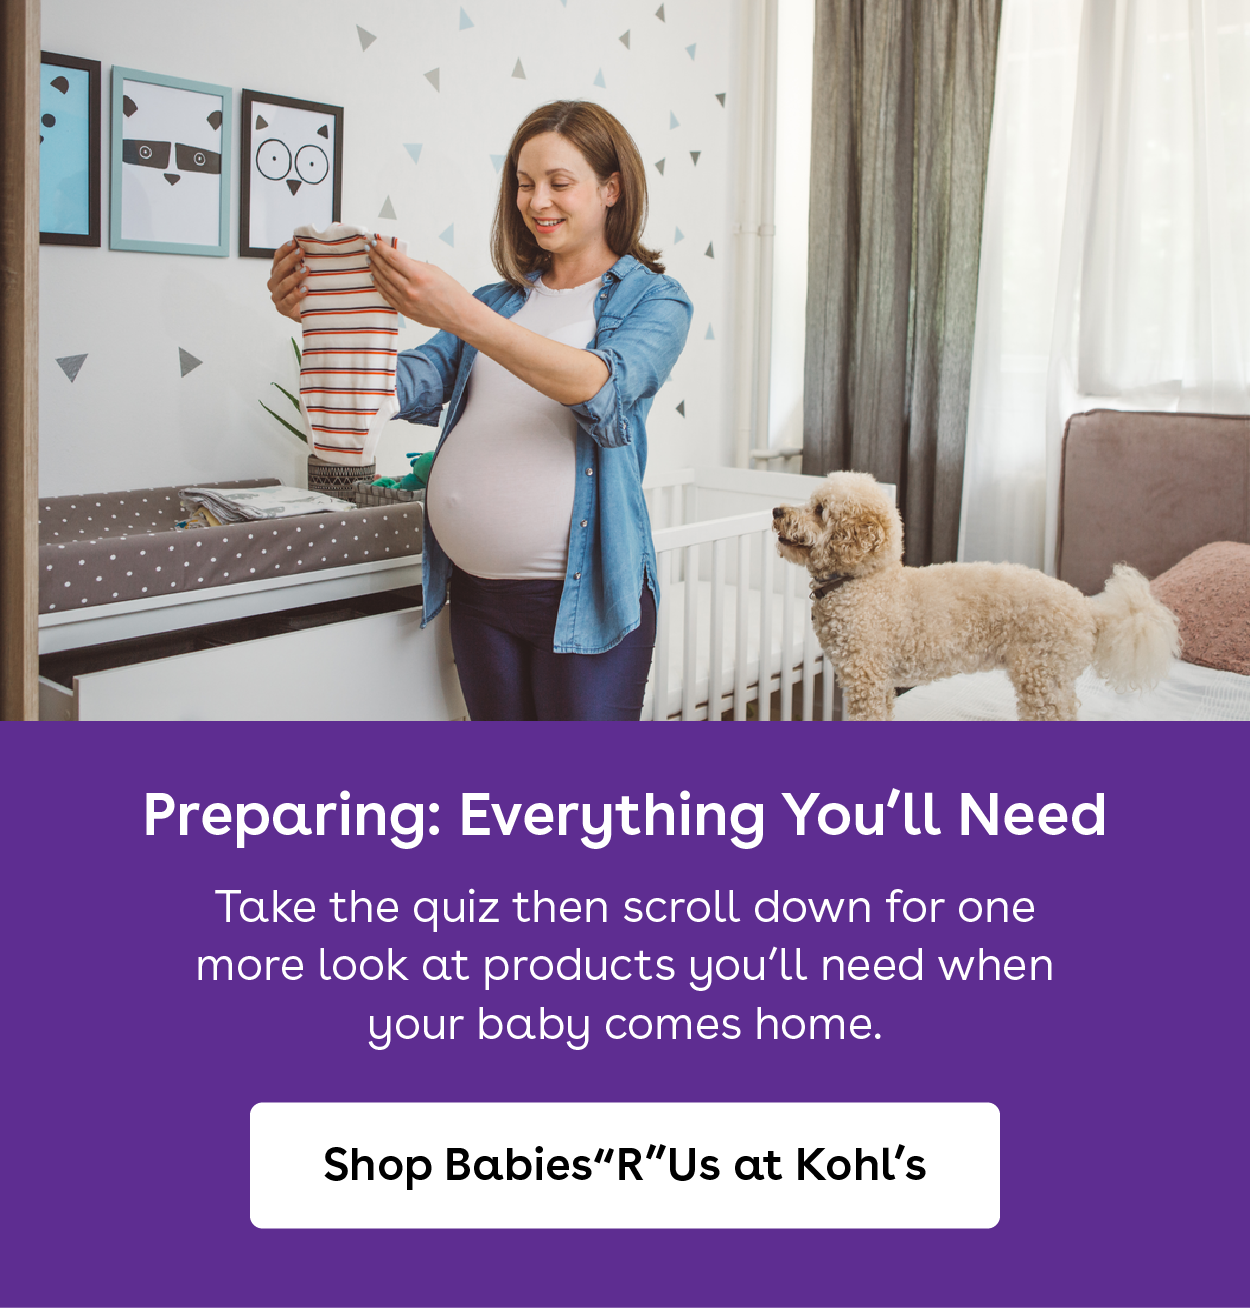 Preparing everything you will need. take the quiz then scroll down for one more look at products you will need when your baby comes home.